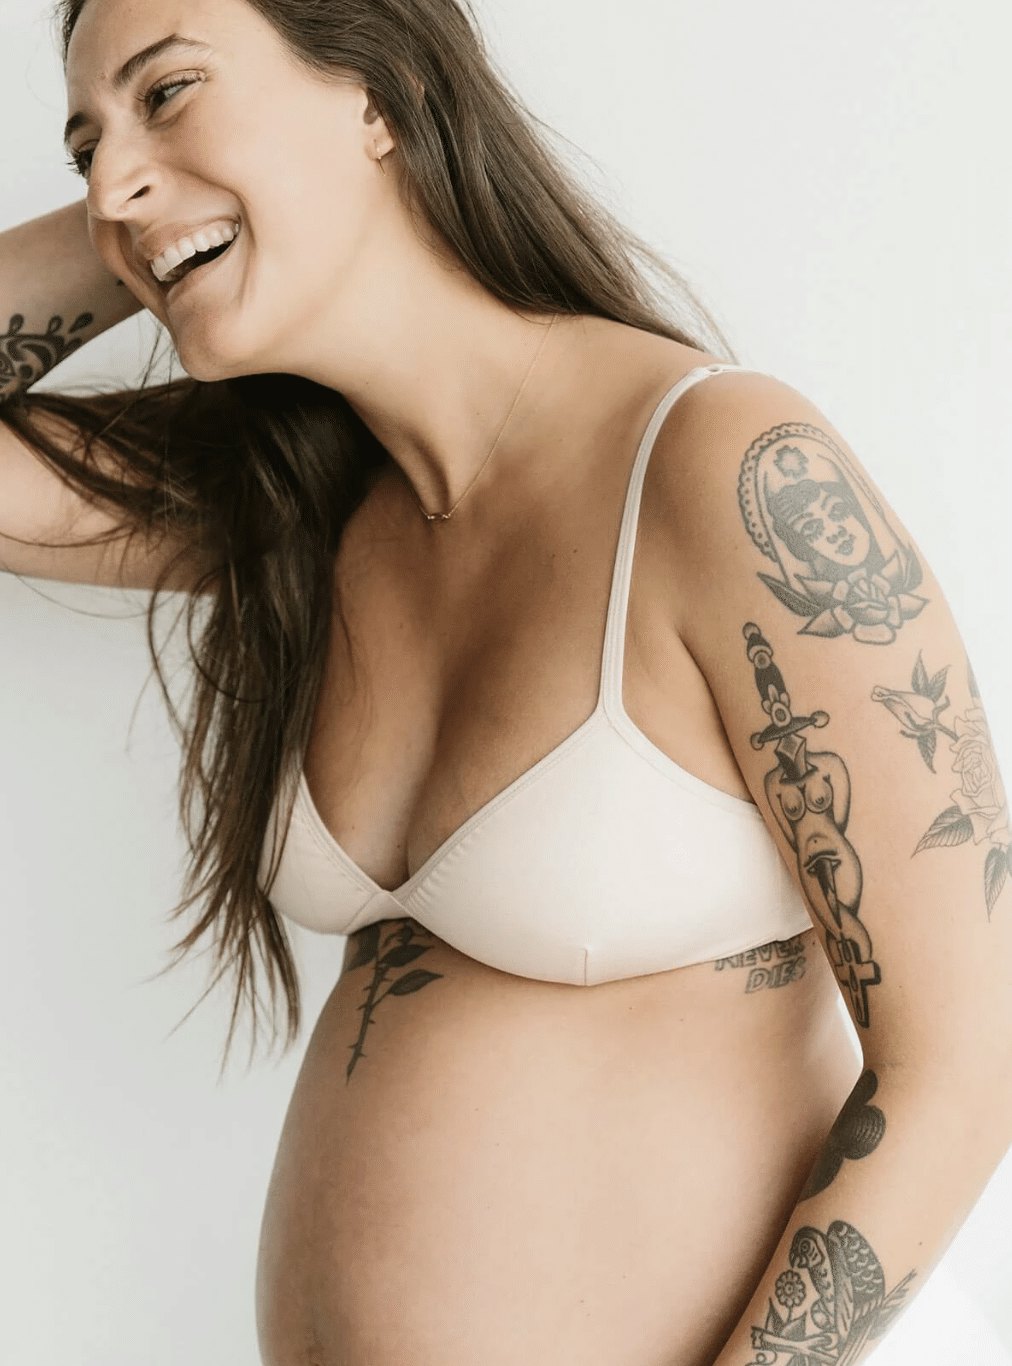 Comfy, Cute *And* Convenient: 11 Nursing Bras That Can Do It All